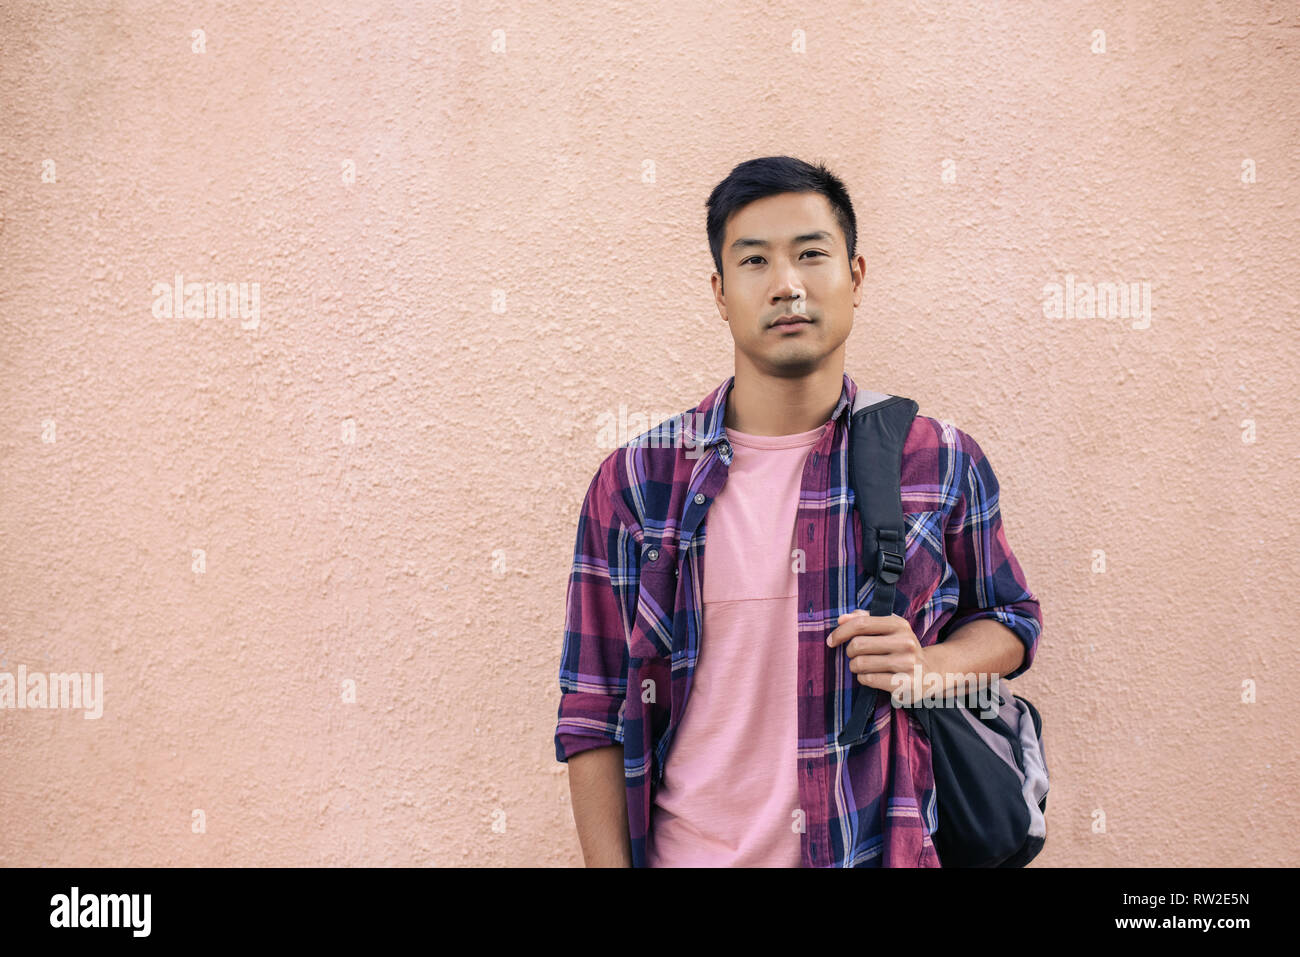 Confident young Asian man standing outside carrying a backpack Stock Photo